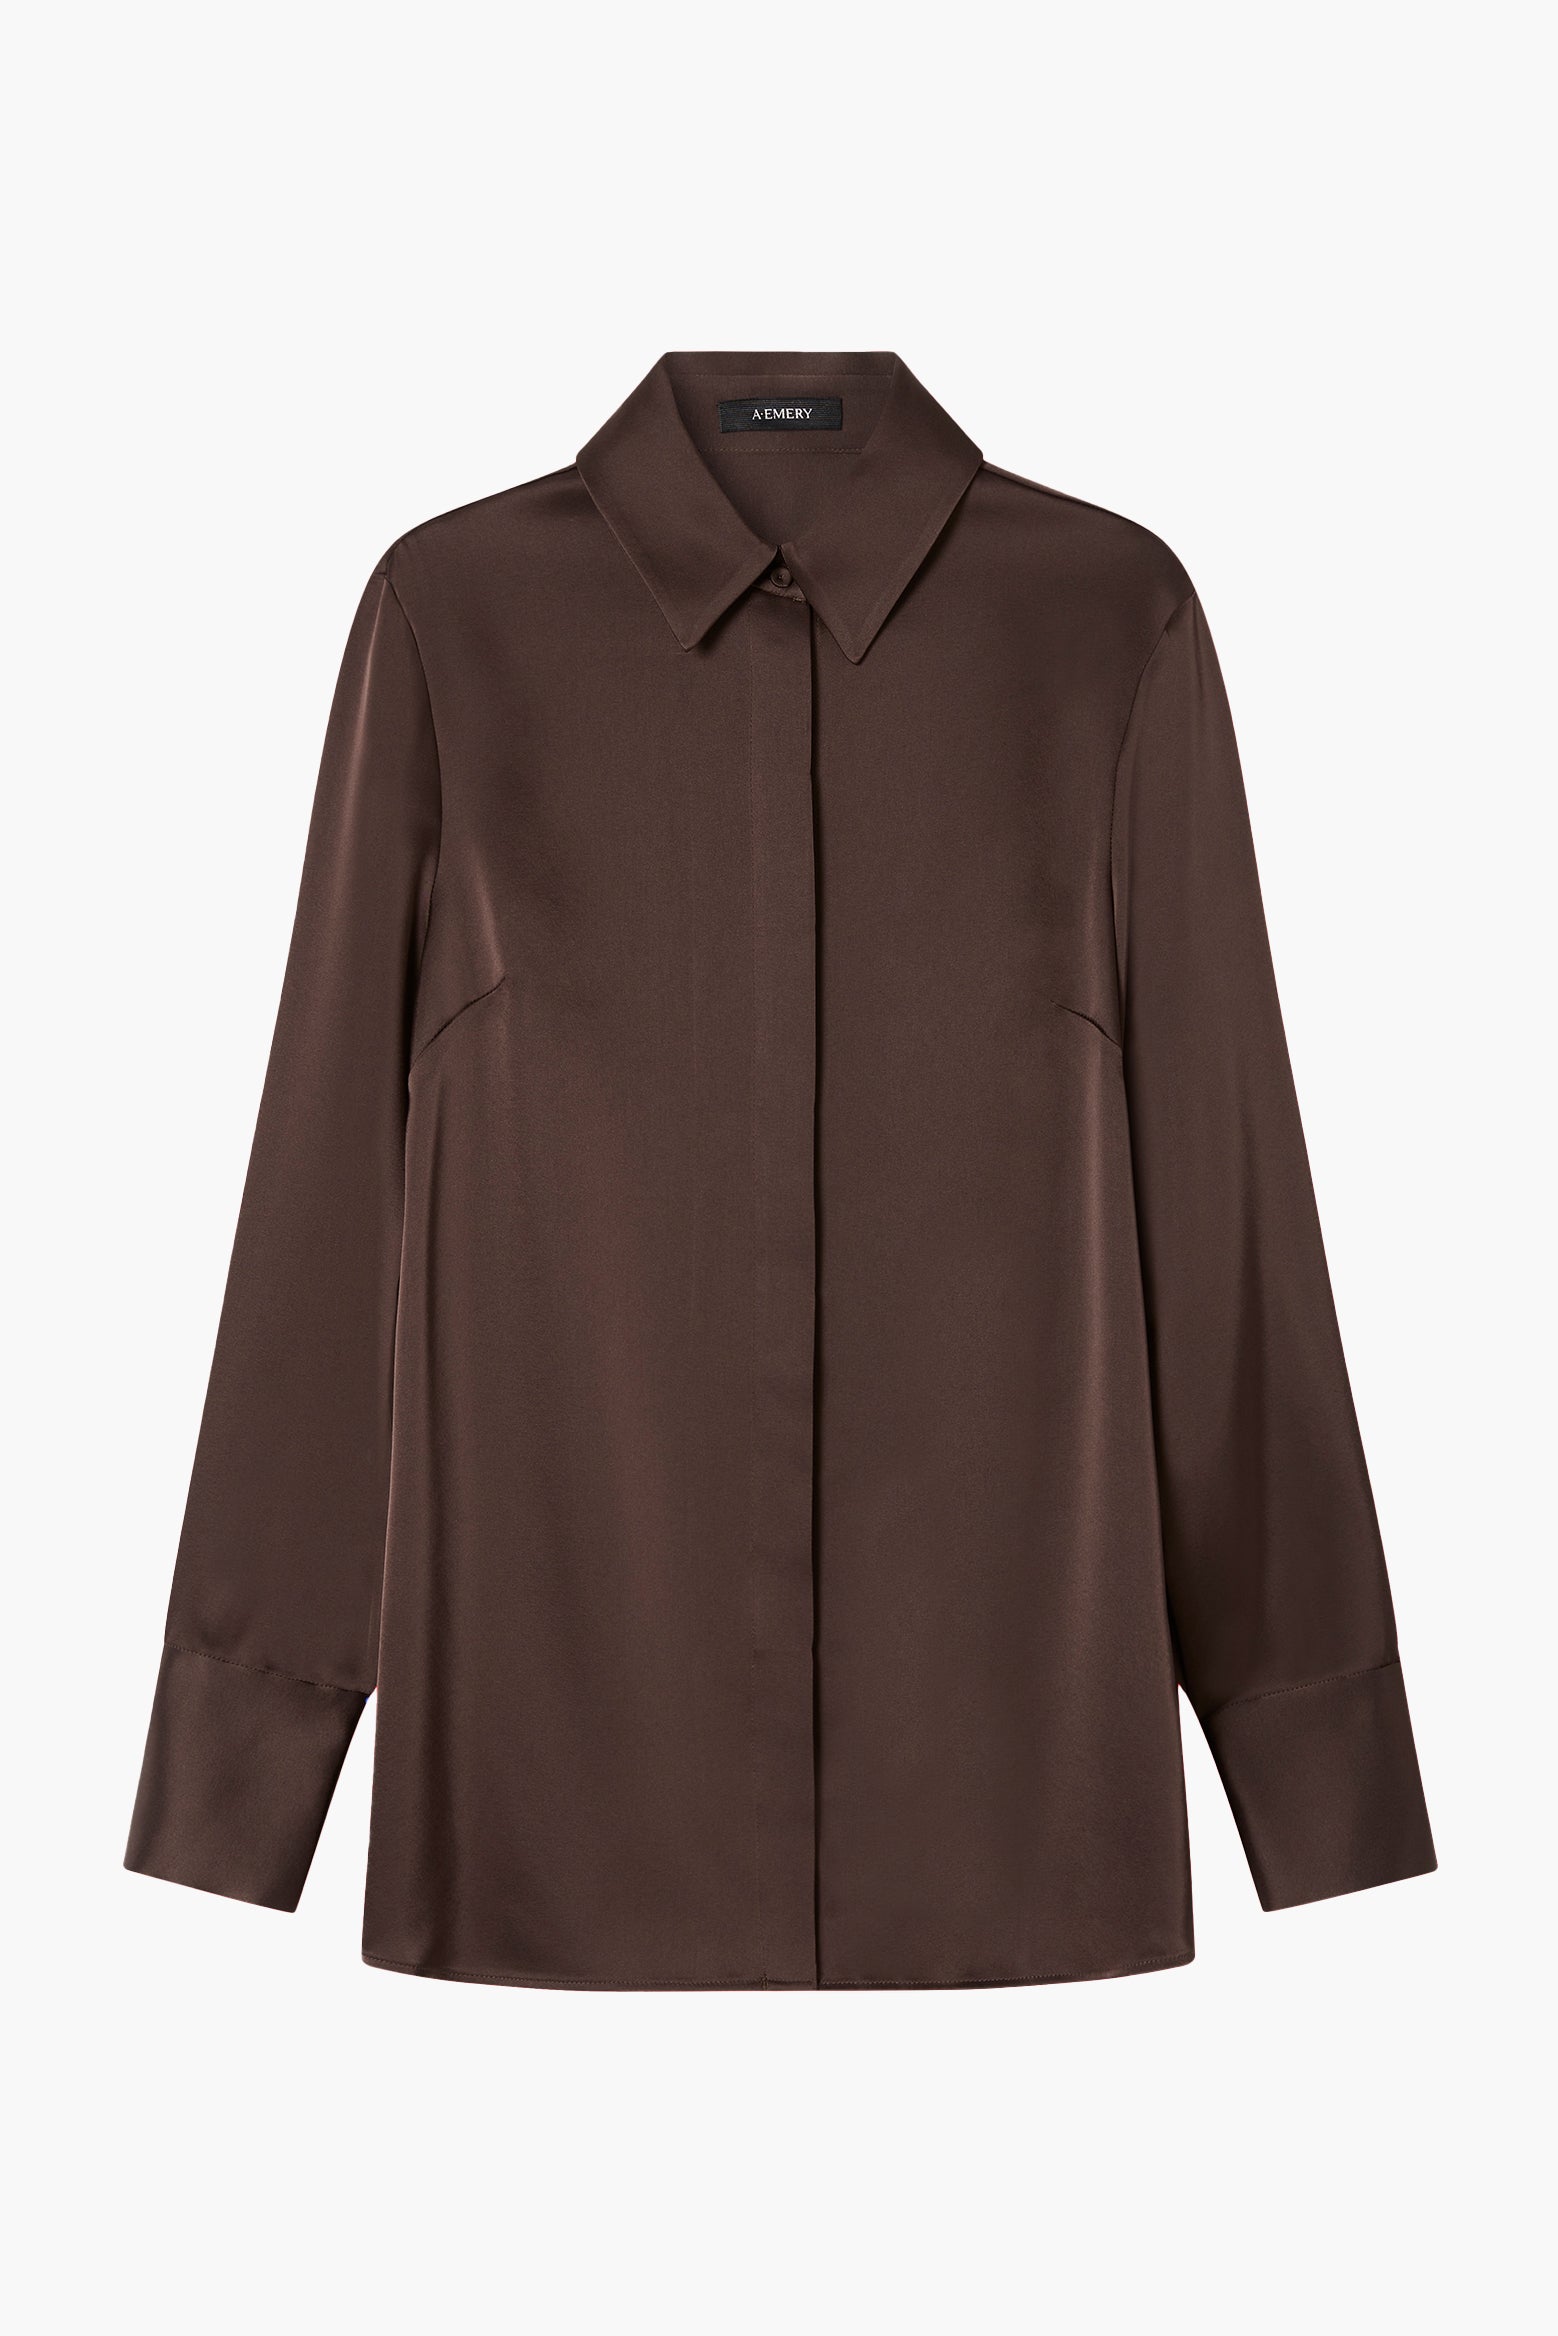 The A.EMERY Philippa Shirt in Chocolate available at The New Trend.